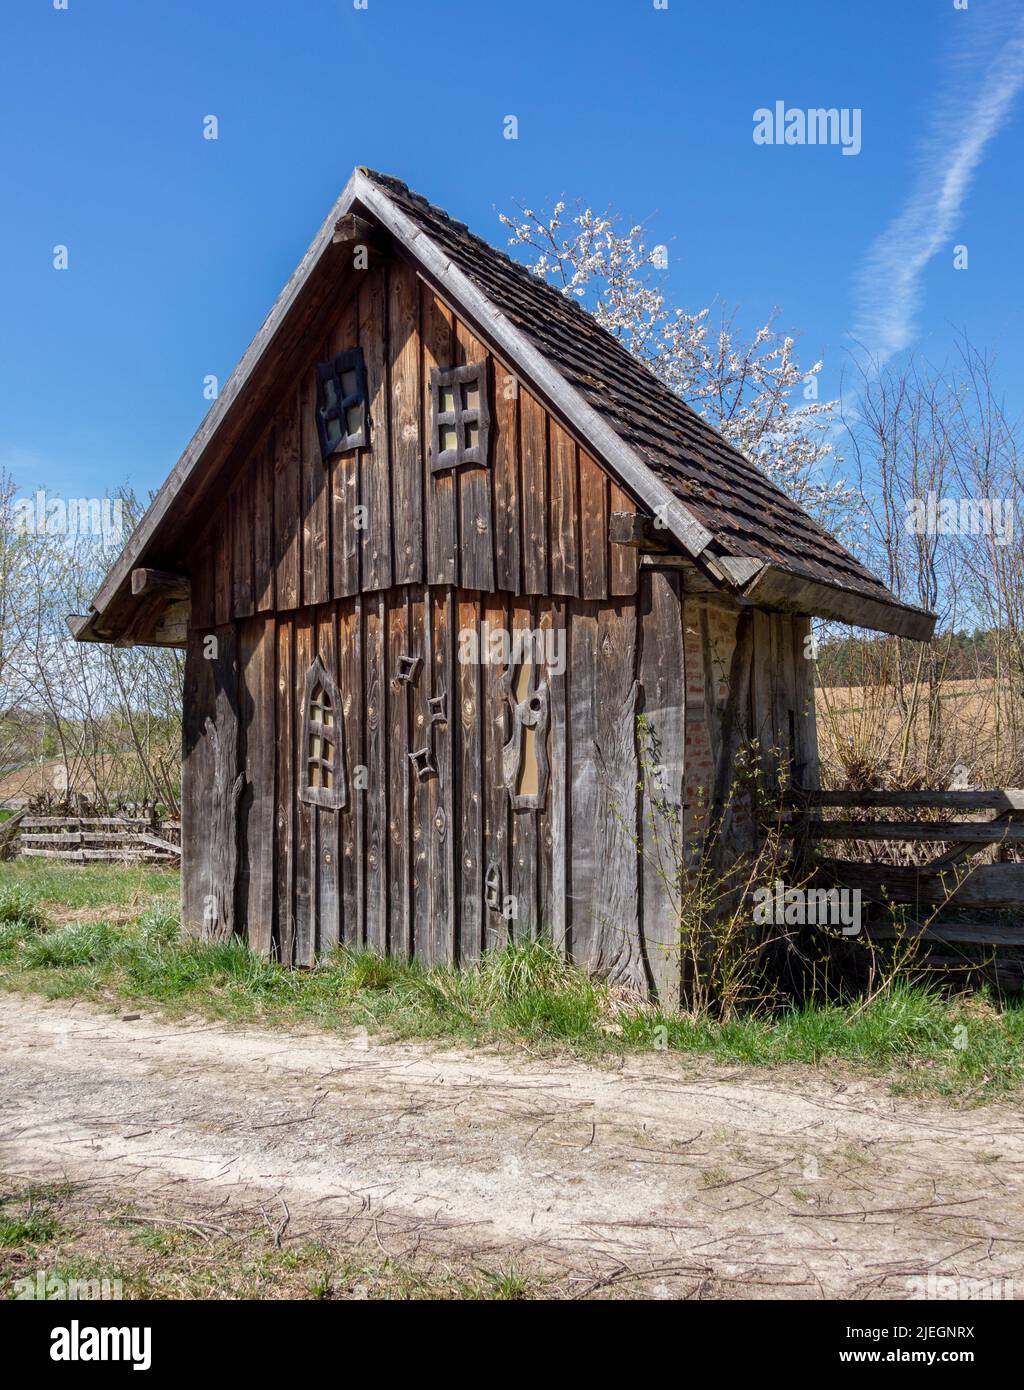 Medieval wooden hut in sunny ambiance at early spring time Stock Photo